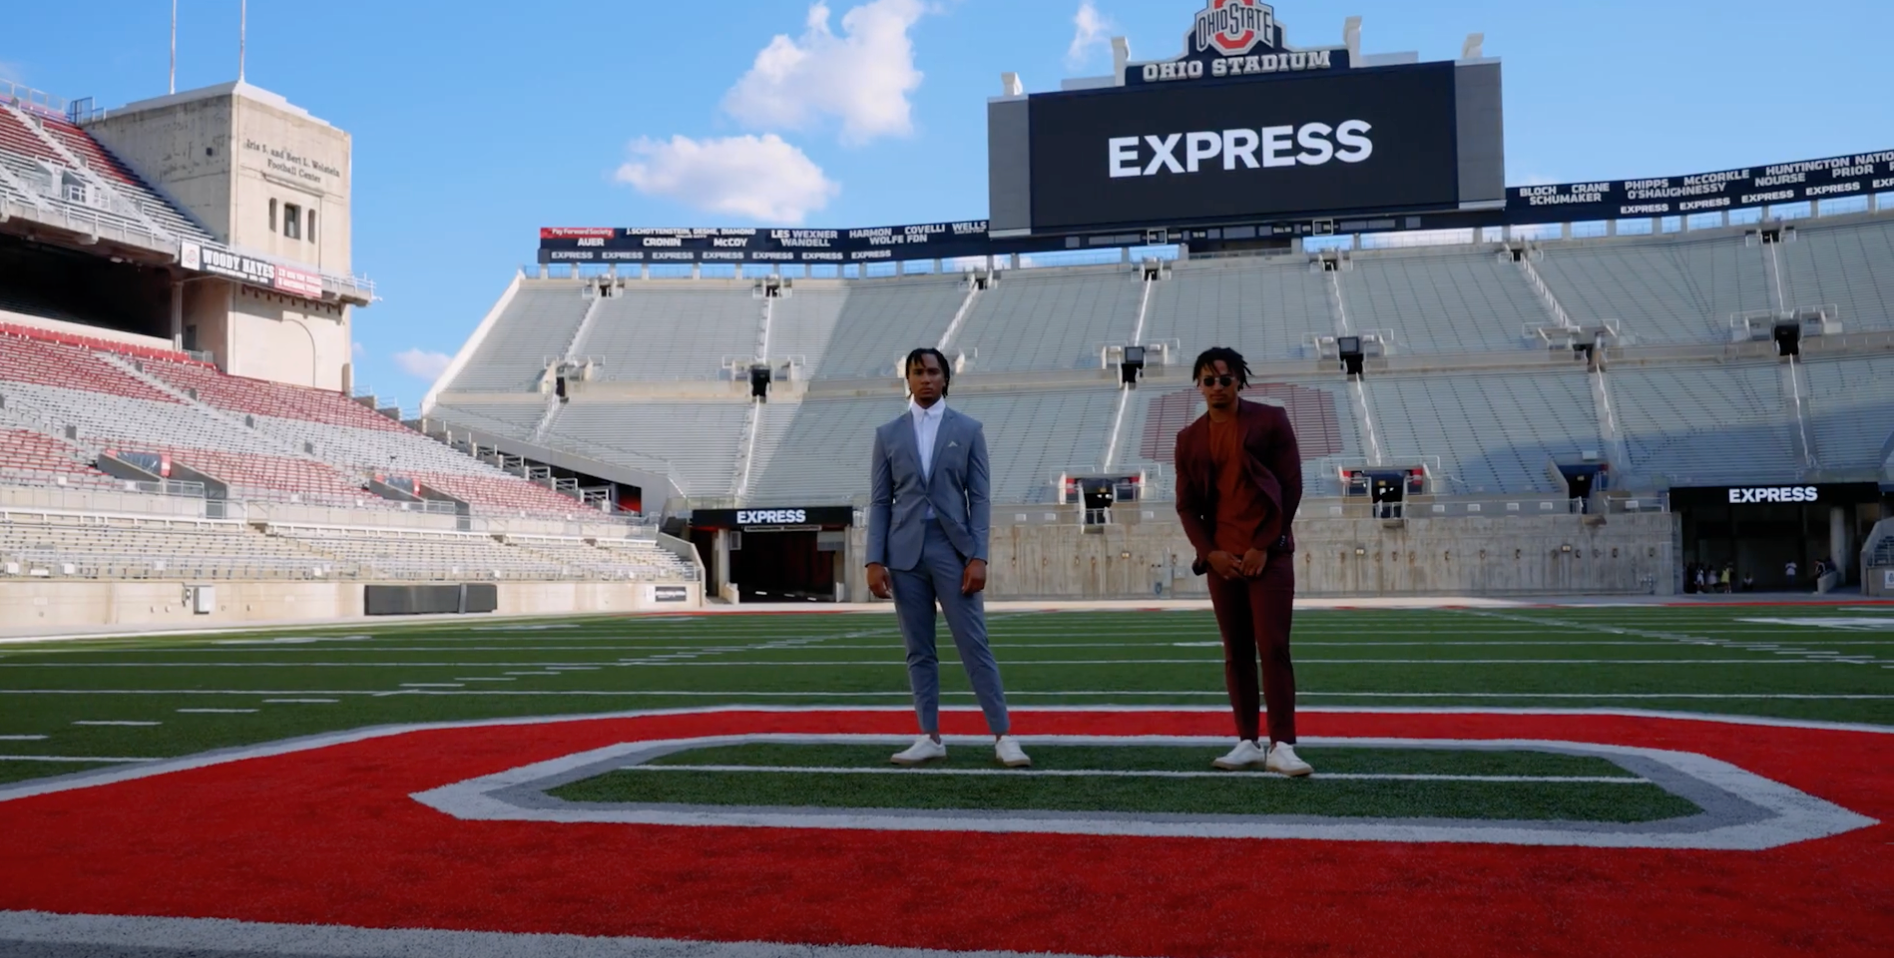 two athletes on a football field wearing suits with an "Express" sign in the background